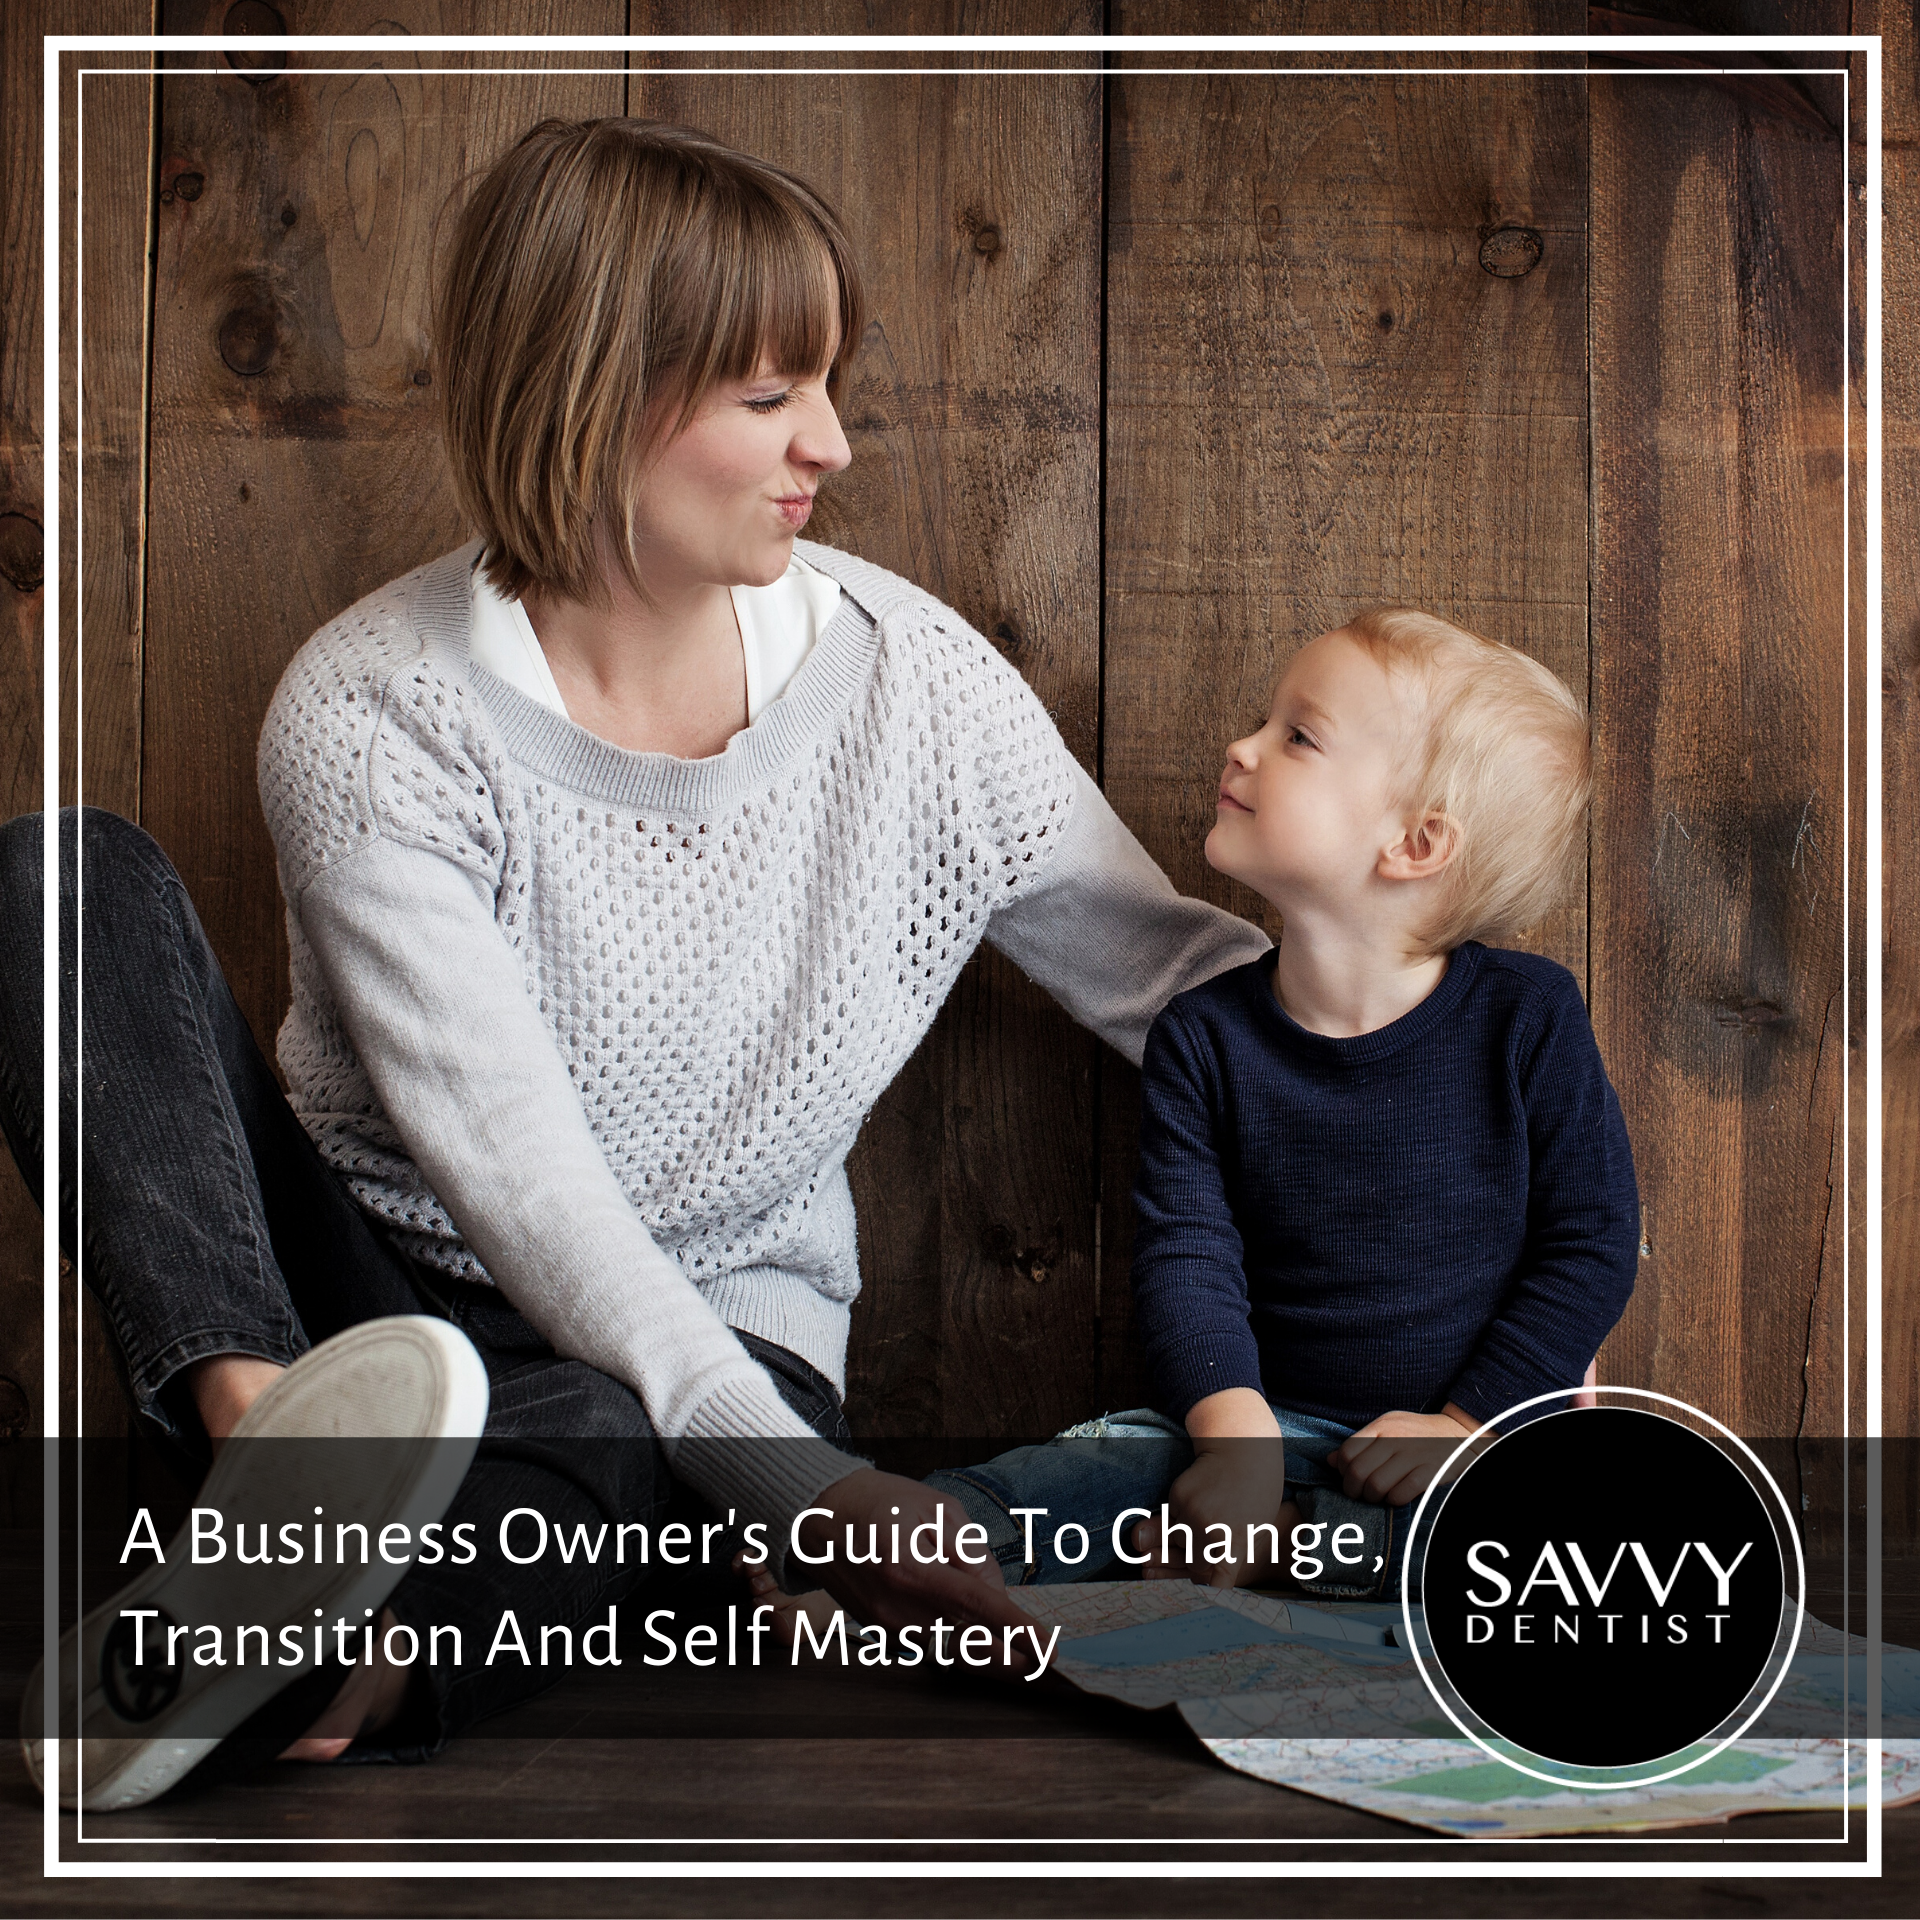 A Business Owner’s Guide To Change, Transition And Self Mastery